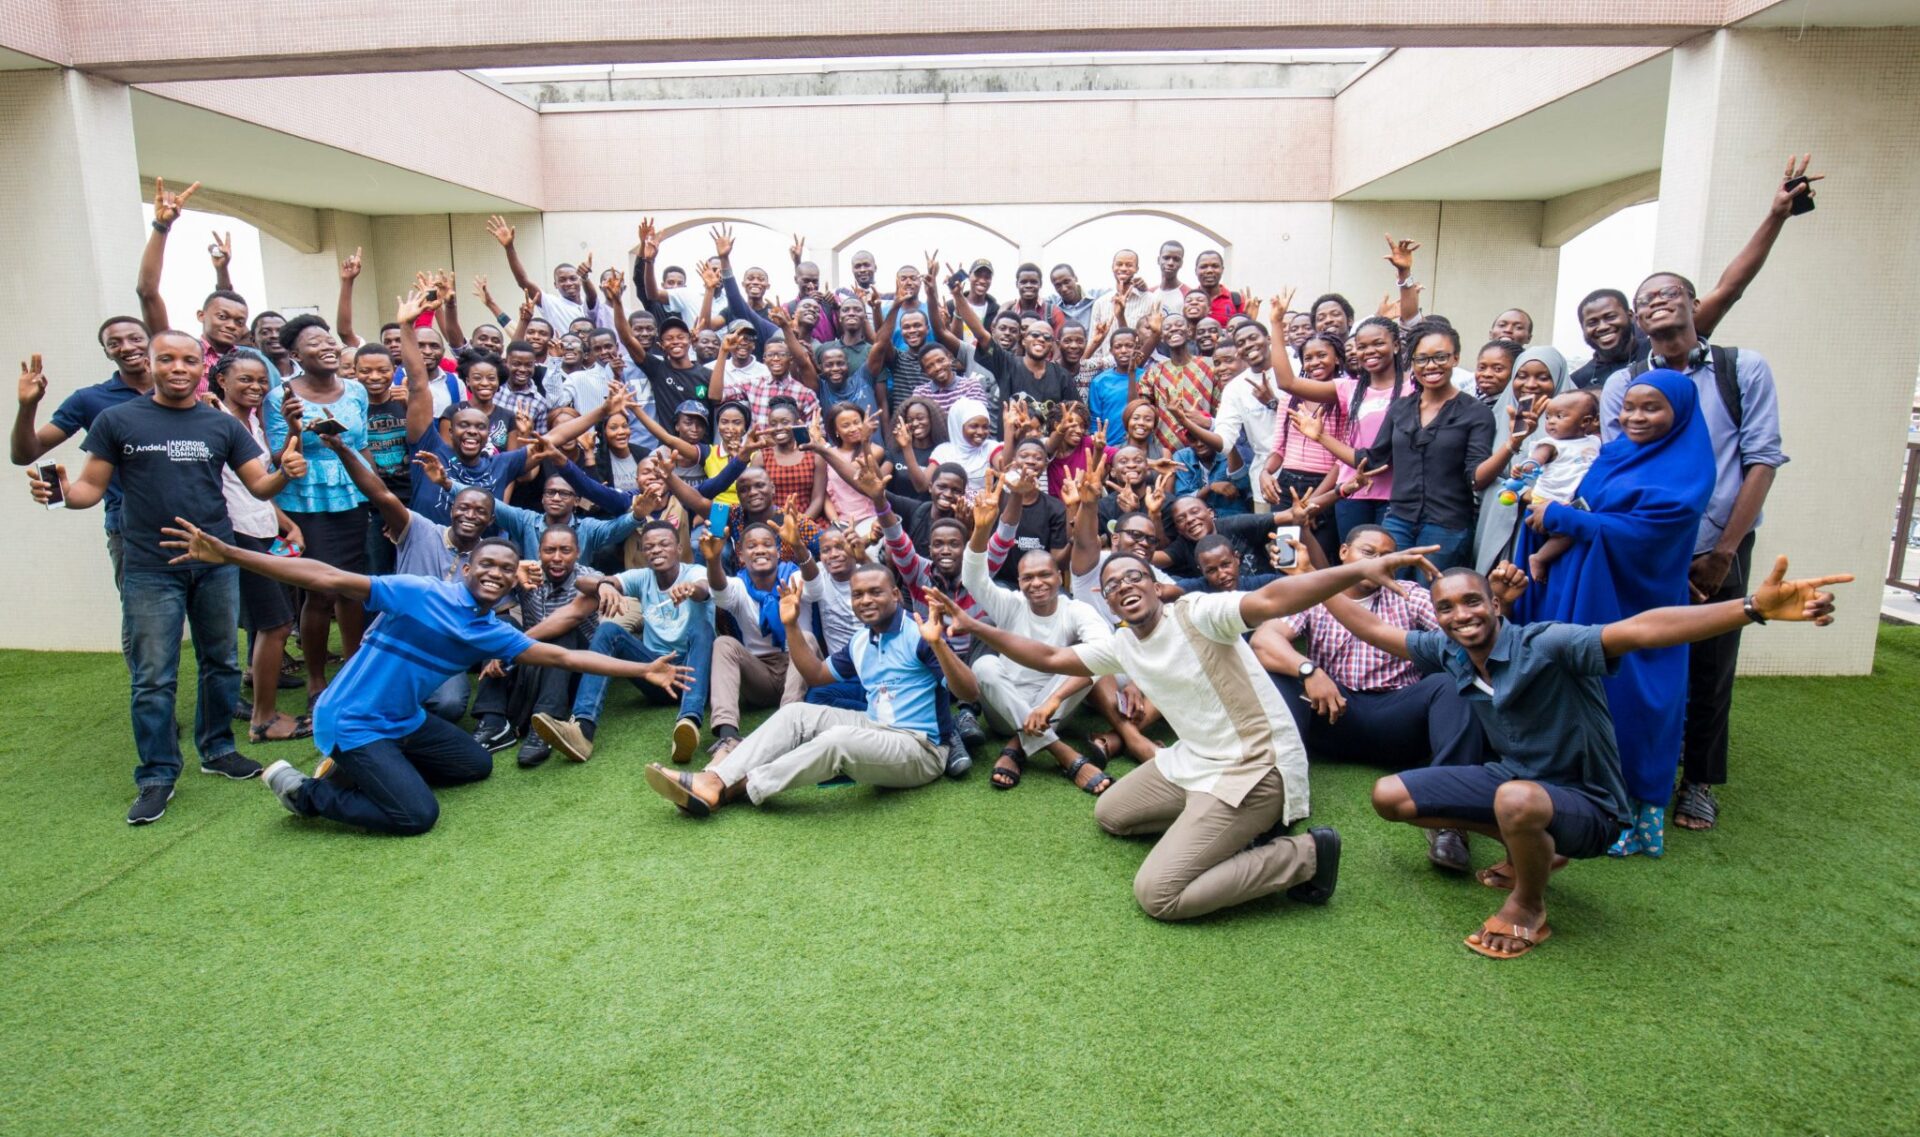 Andela team seen at an event. Andela, which has a Nigeria office, builds high-performing engineering teams with Africa's most talented software developers, and recently secured $40 million in Series C funding   Photo credit: Andela